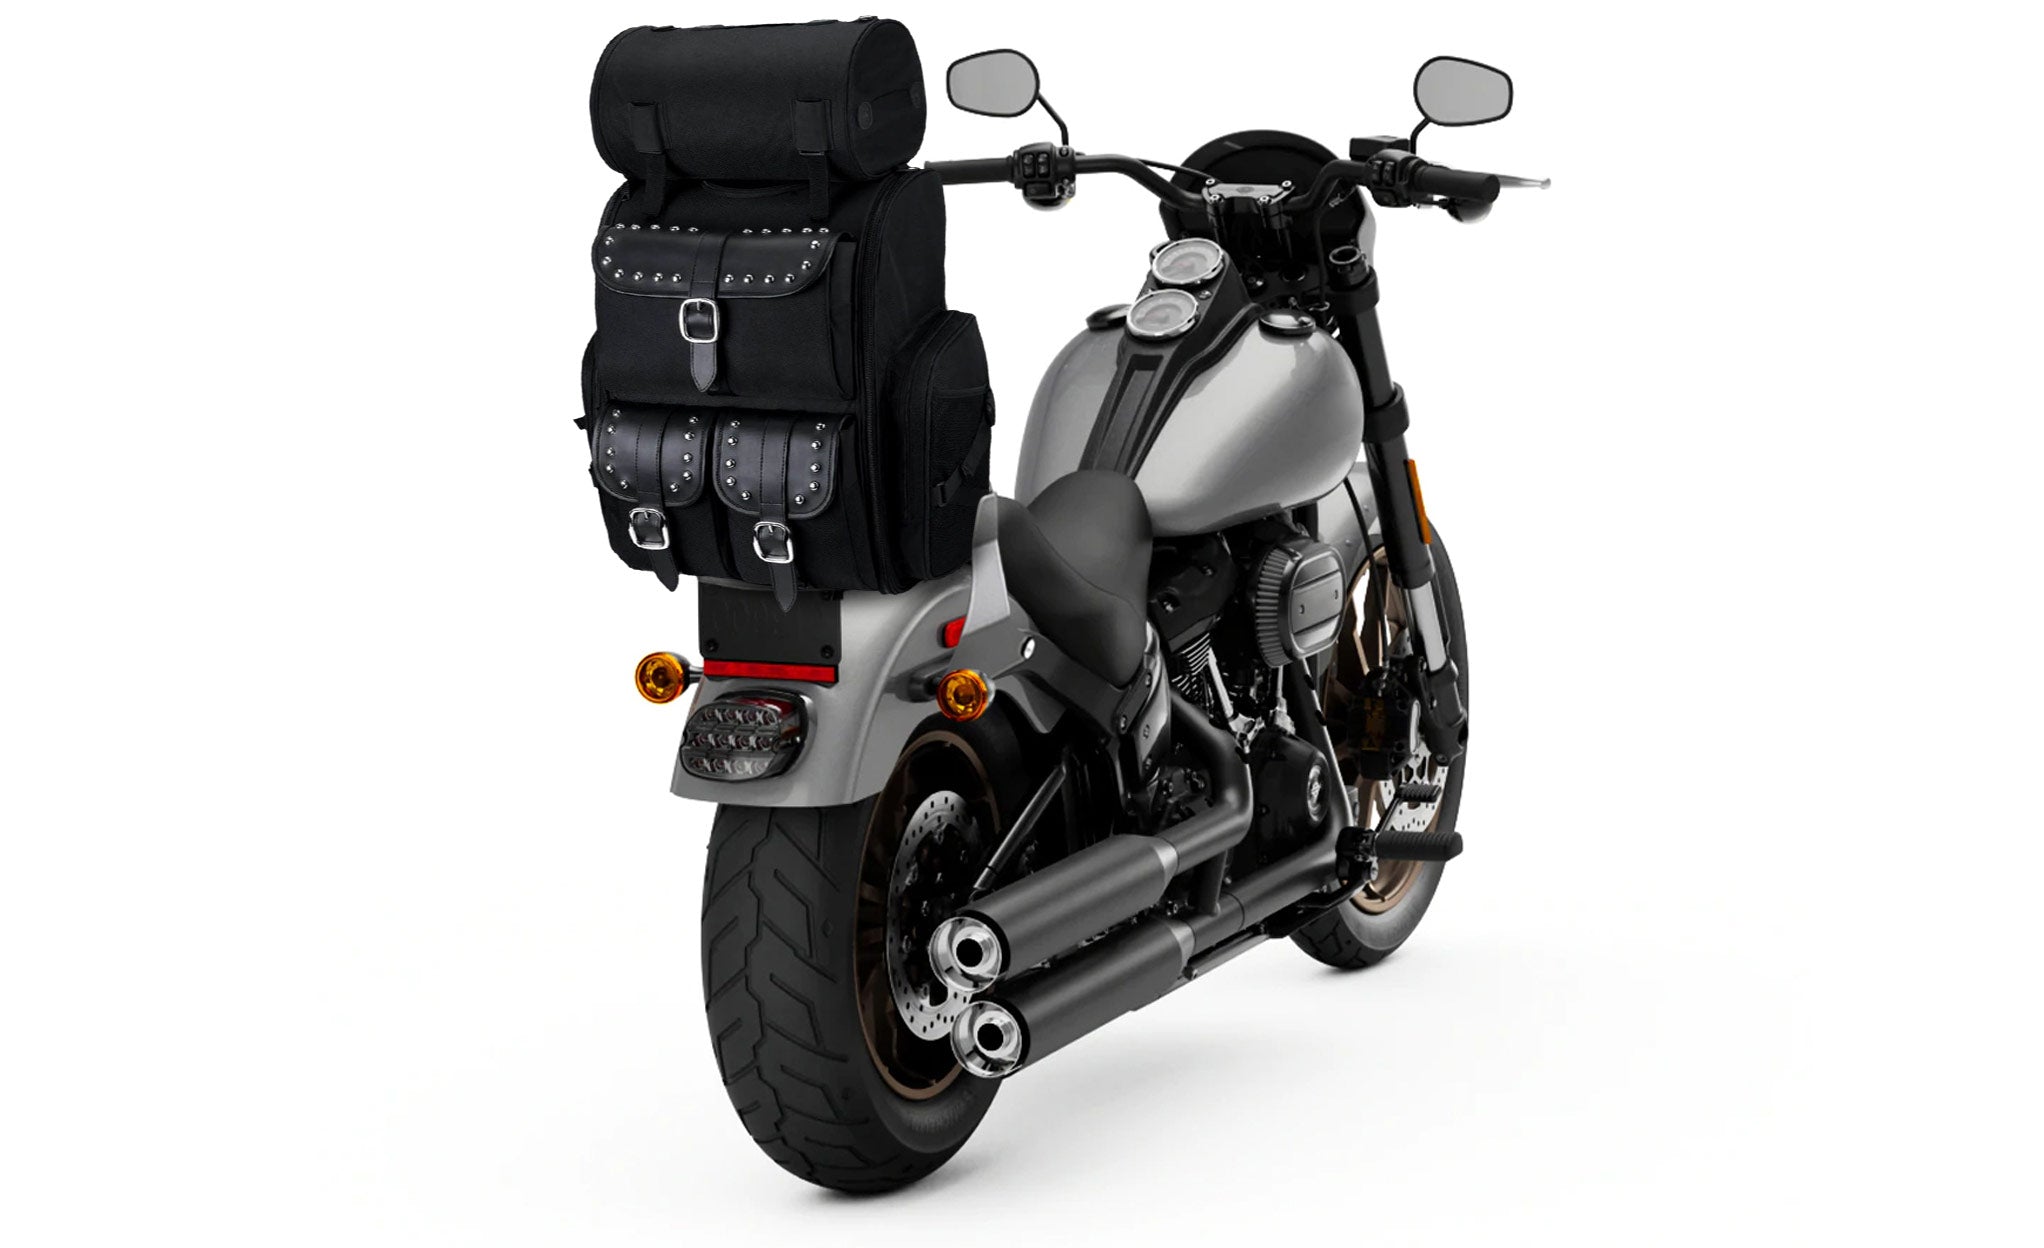 Viking Highway Extra Large Studded Victory Motorcycle Sissy Bar Bag Bag on Bike View @expand